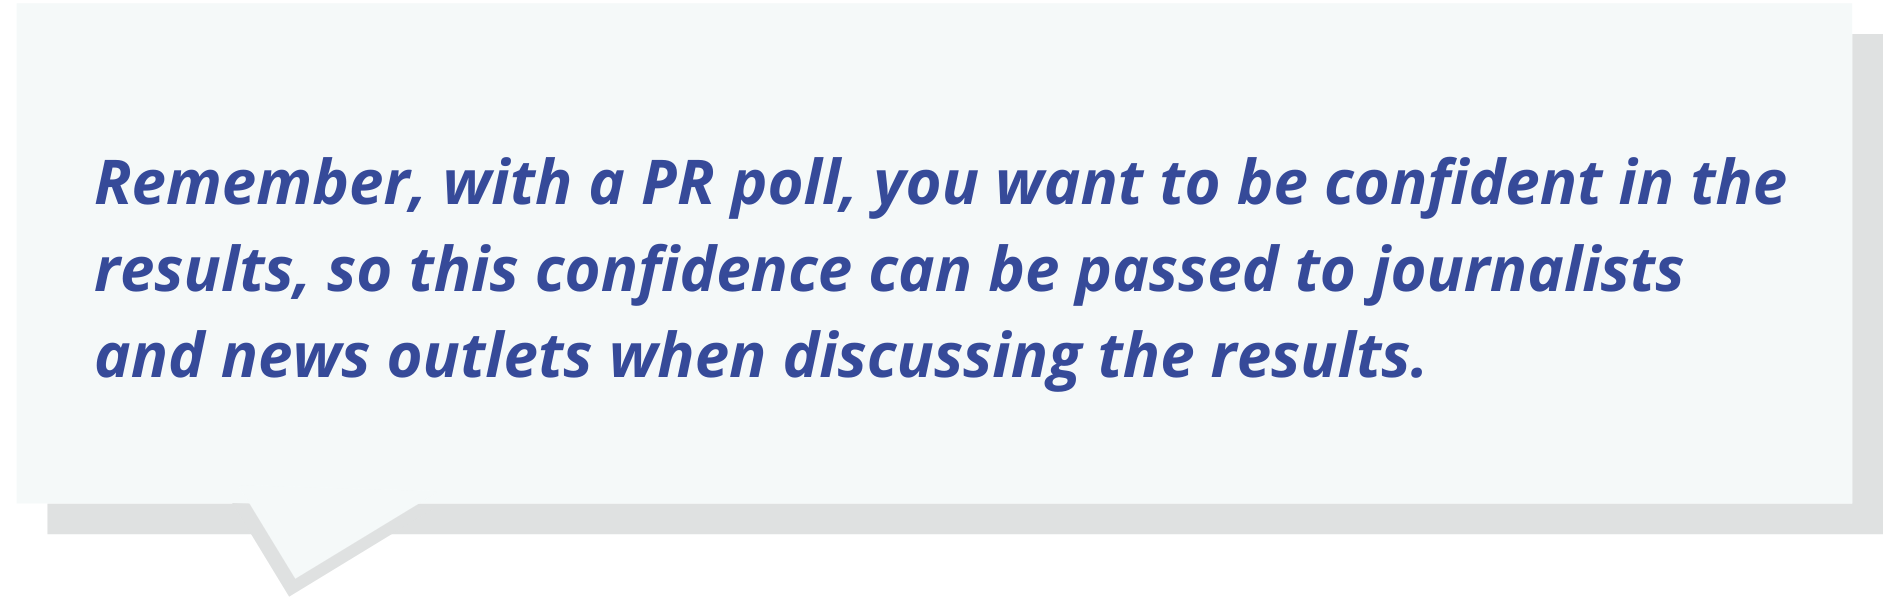 Remember, with a PR poll, you want to be confident in the results, so this confidence can be passed to journalists and news outlets when discussing the results.